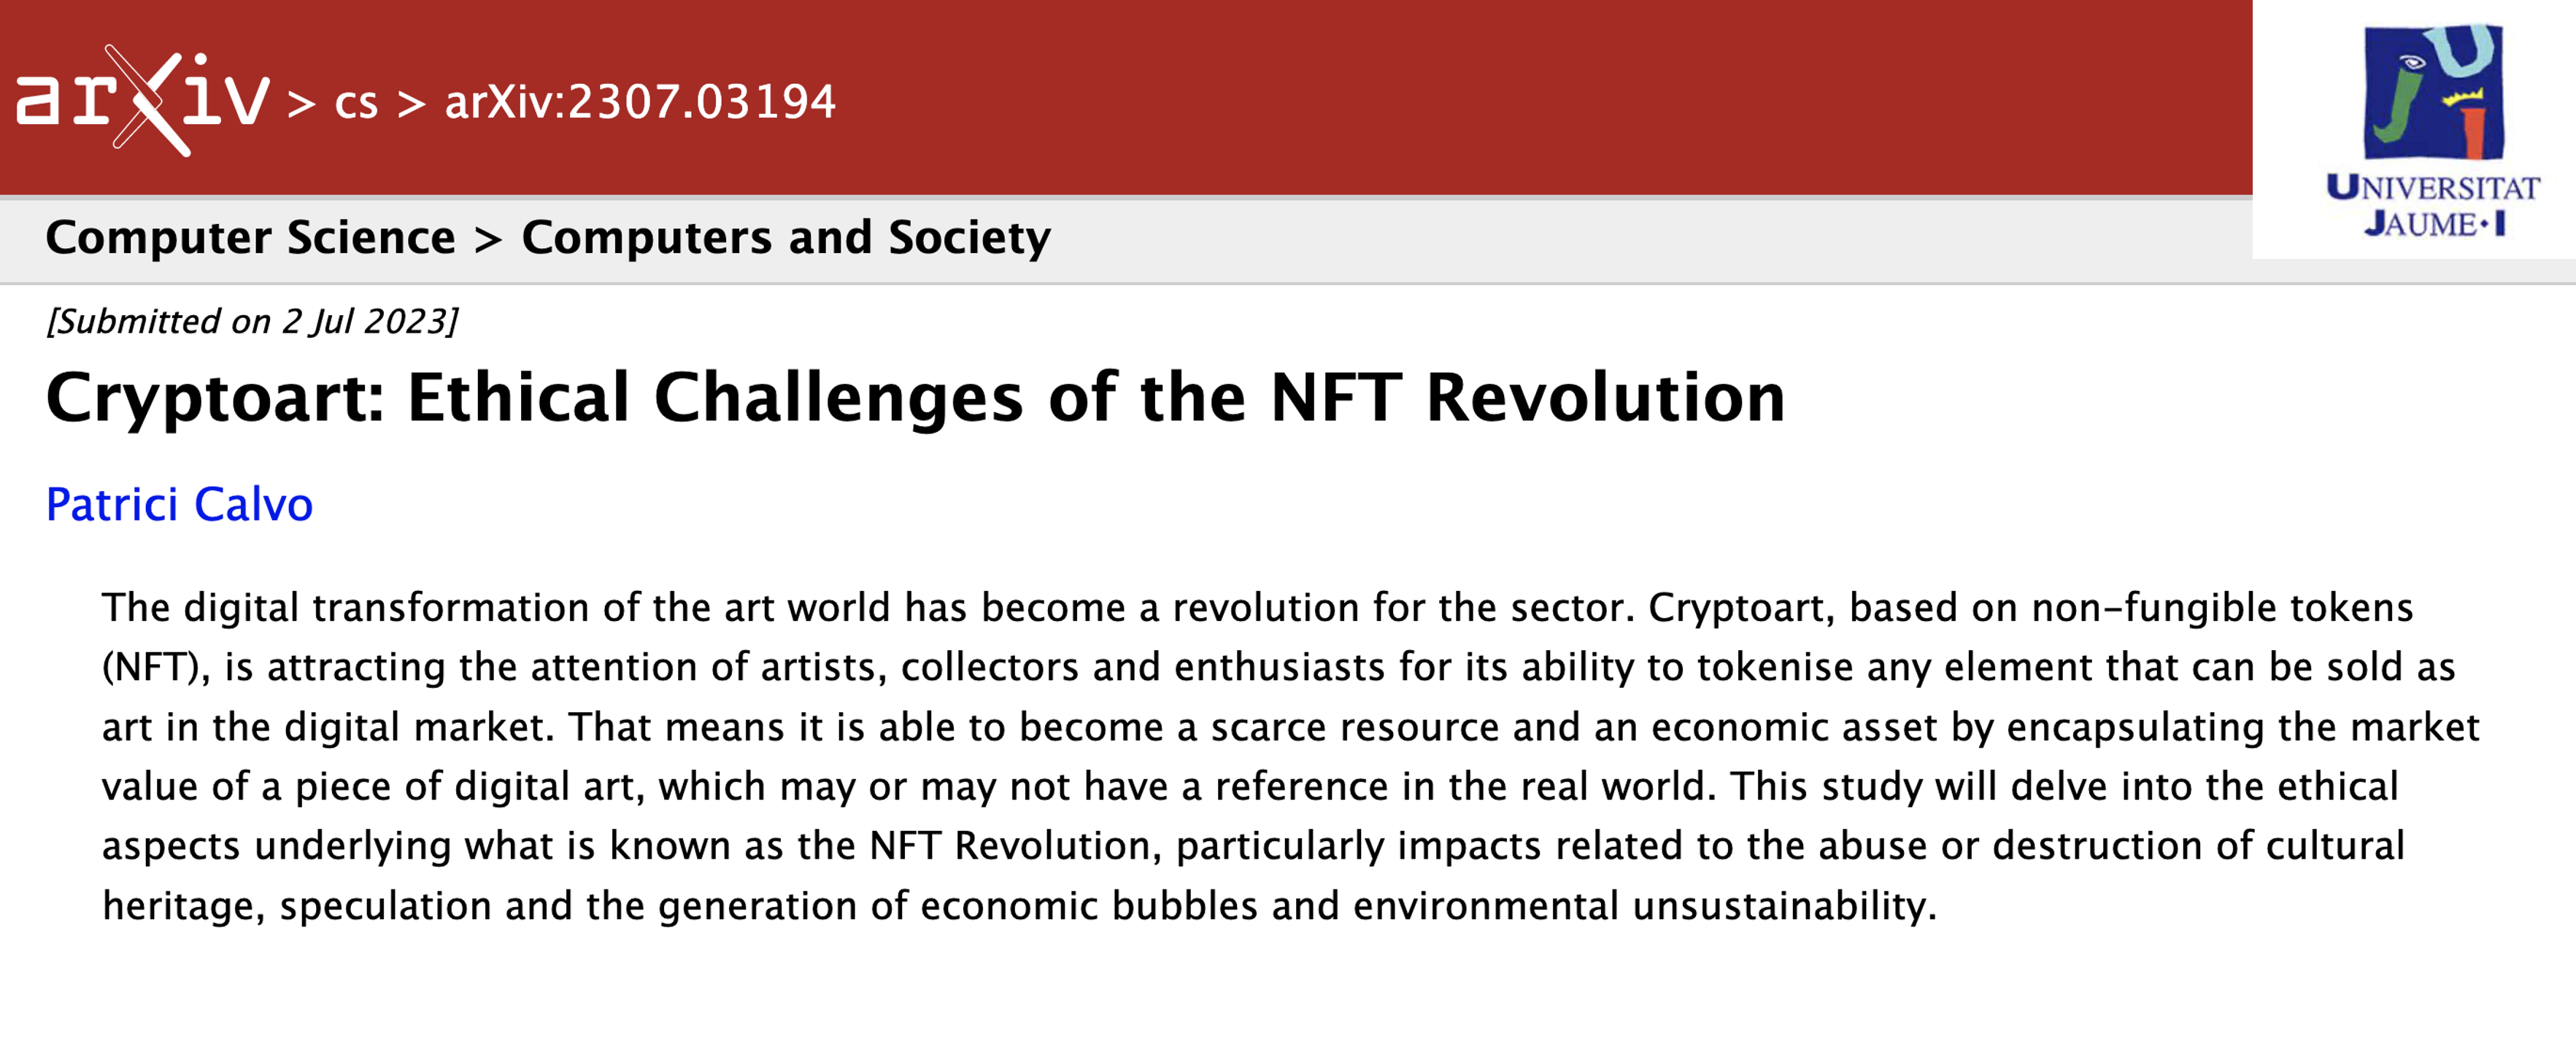 Cryptoart: Ethical Challenges of the NFT Revolution